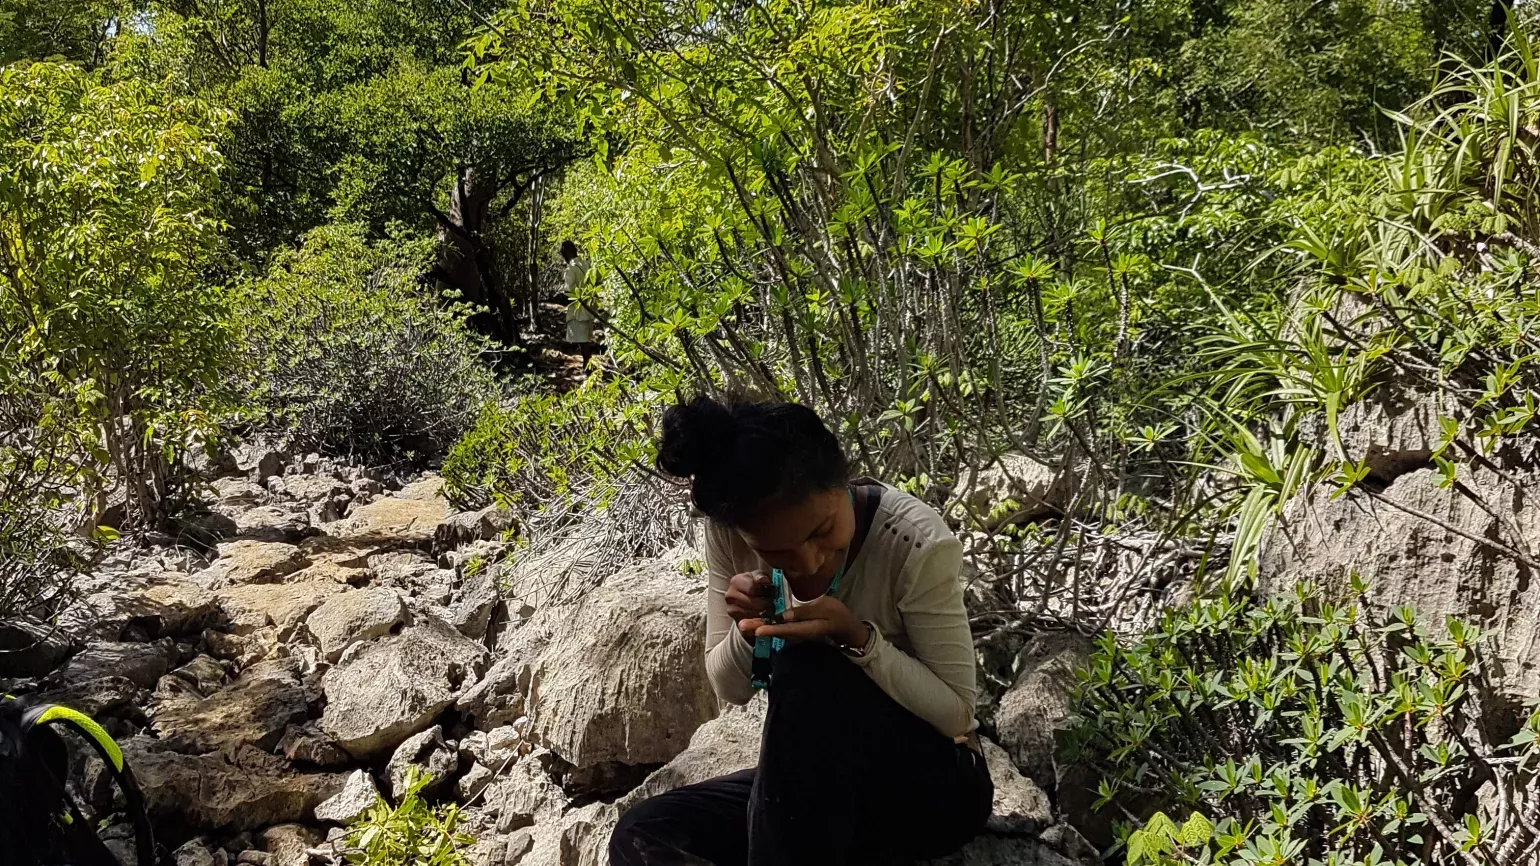 A woman crouches on a rock in a dry riverbed, examining something in her hand with a loupe. Lush vegetation surrounds her